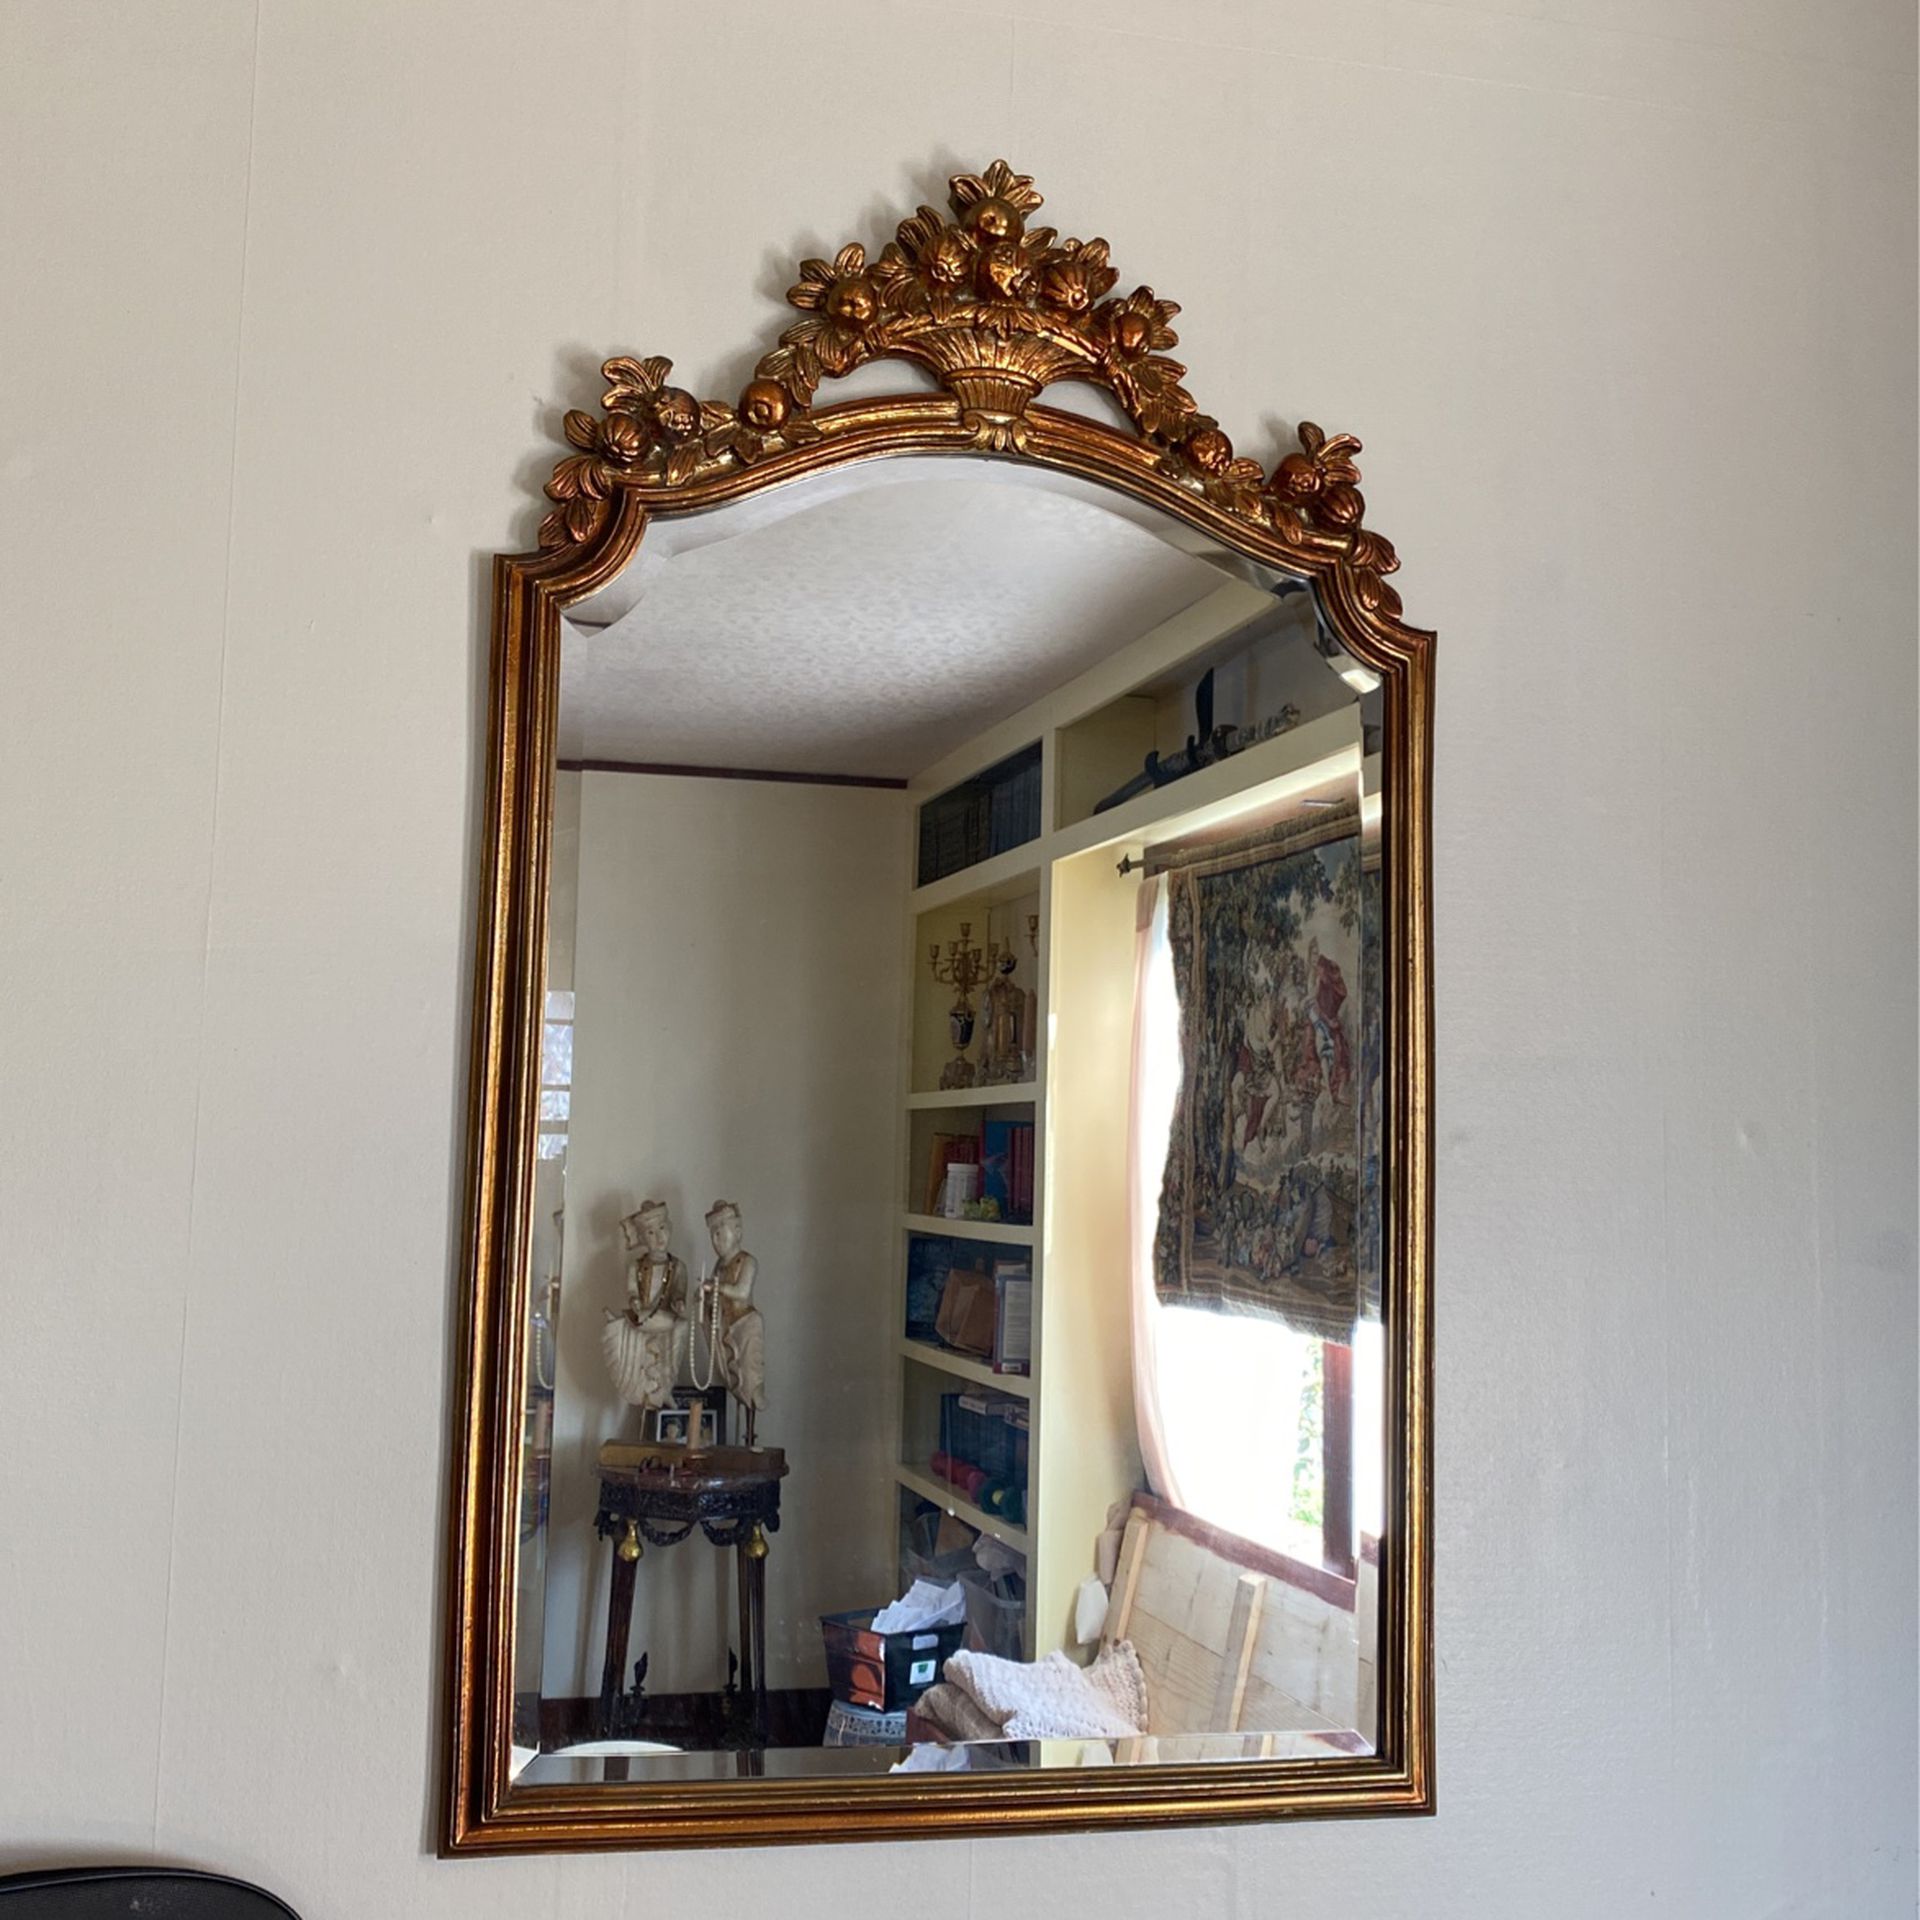 Antique BEVELED FRENCH MIRROR